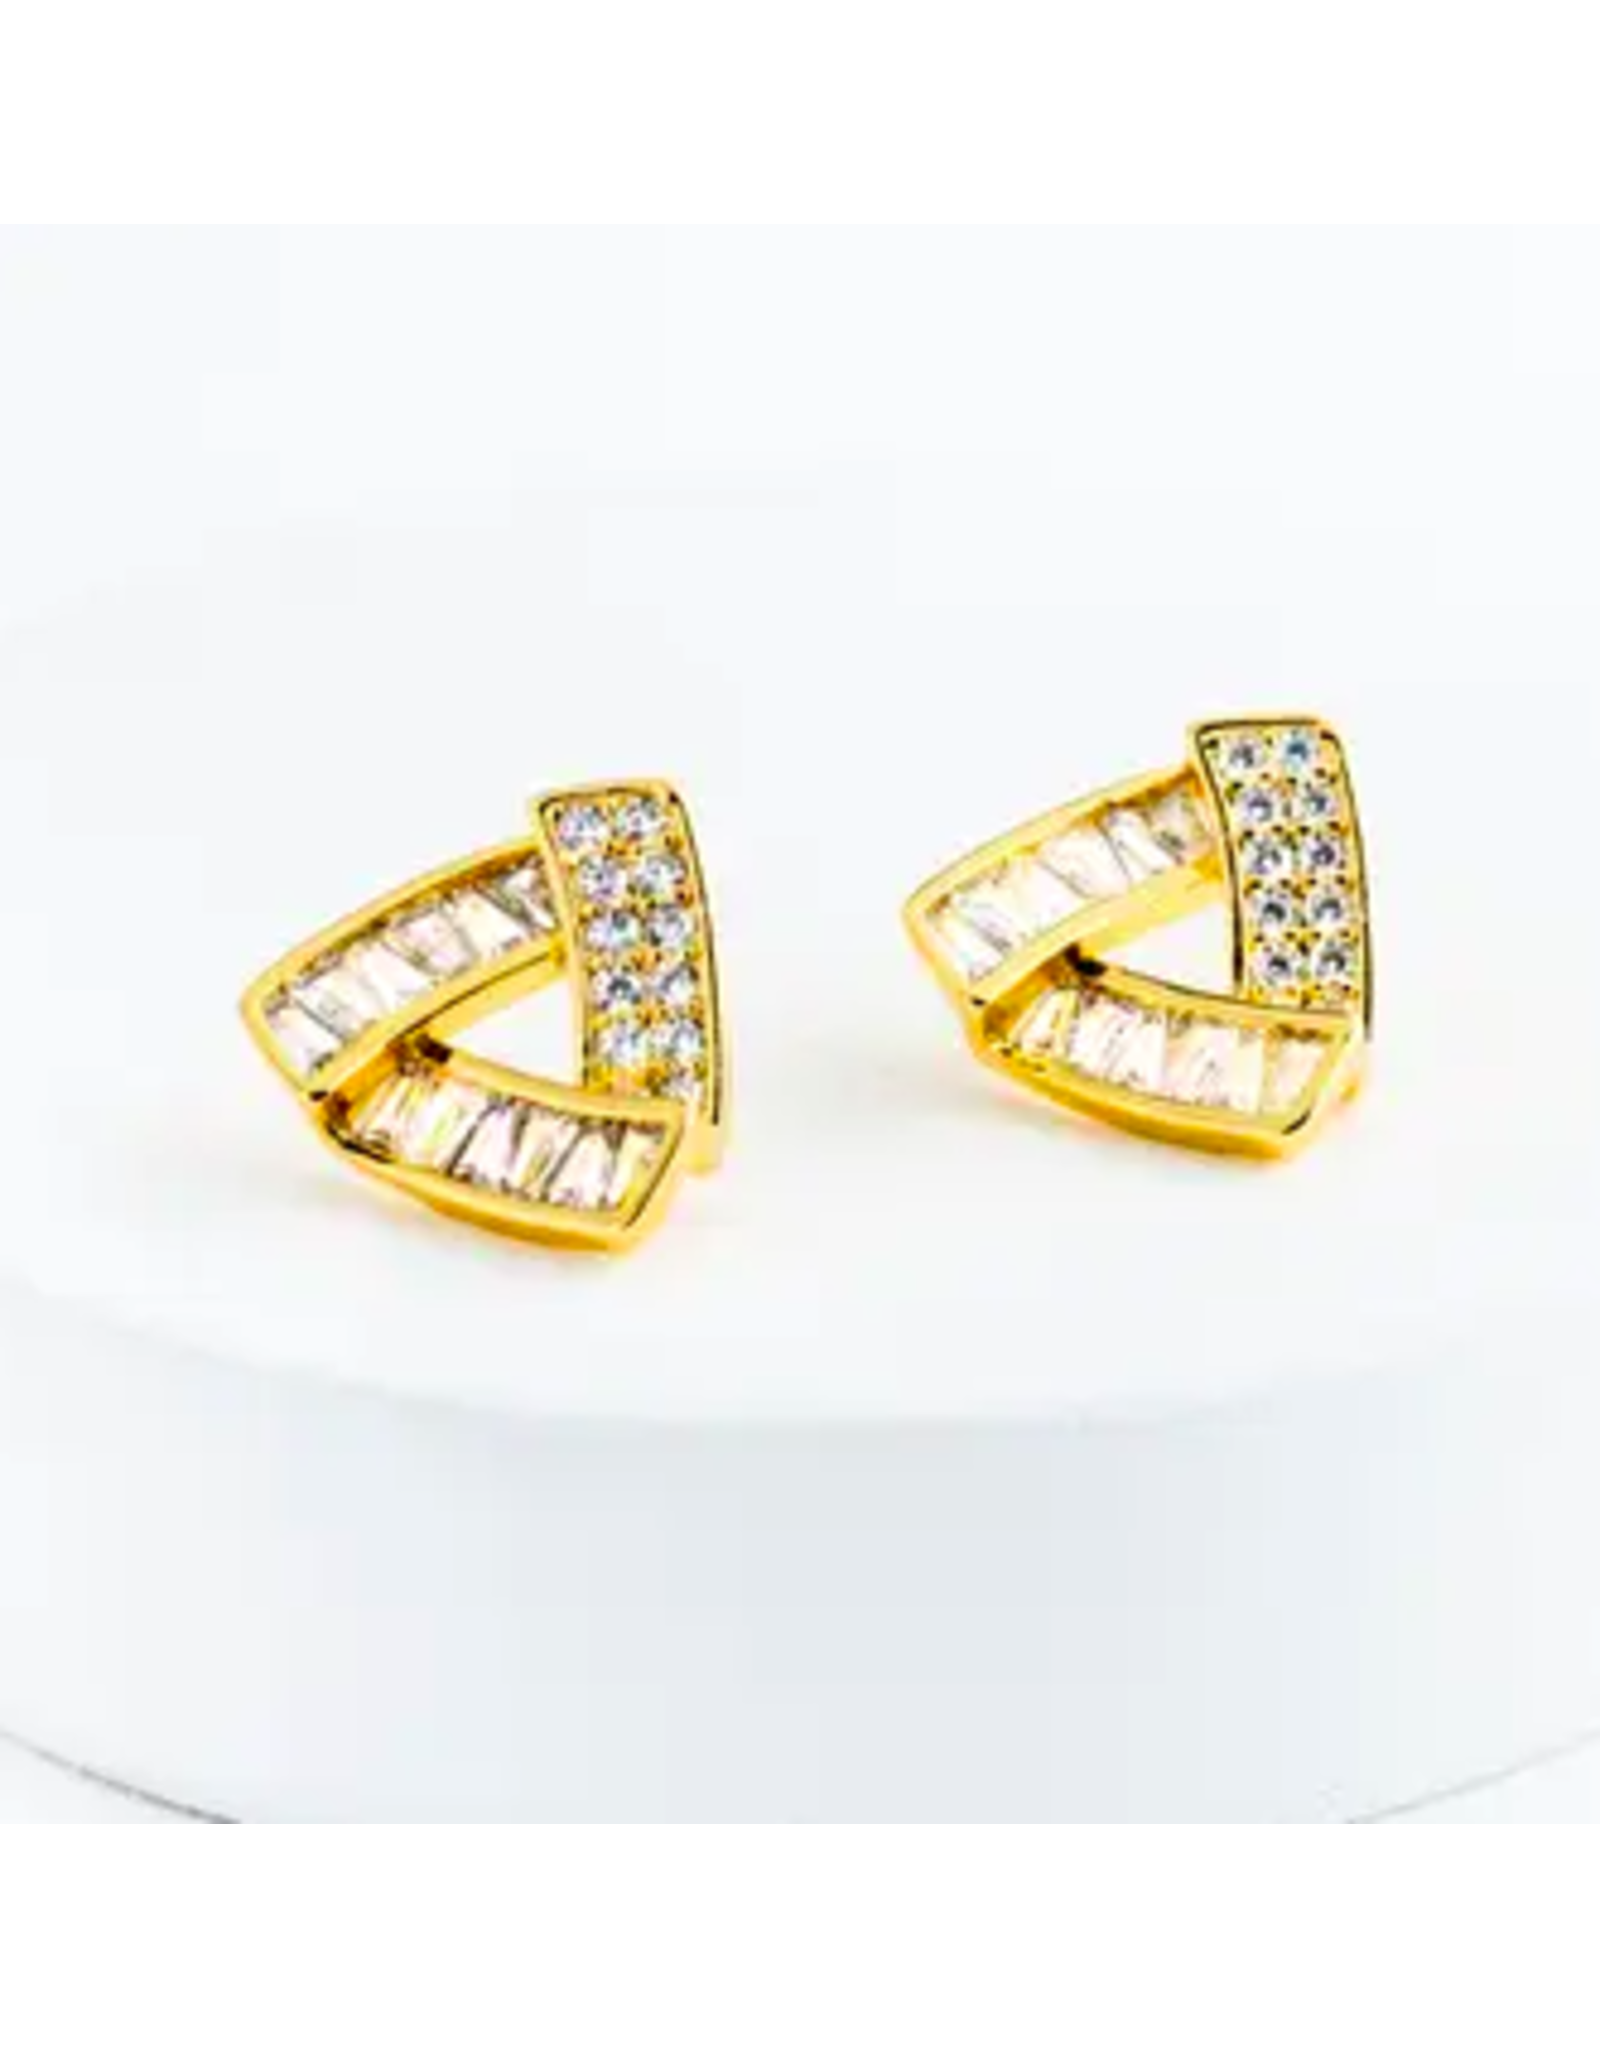 Trade roots Prism Gold and Zircon Studs, Asia